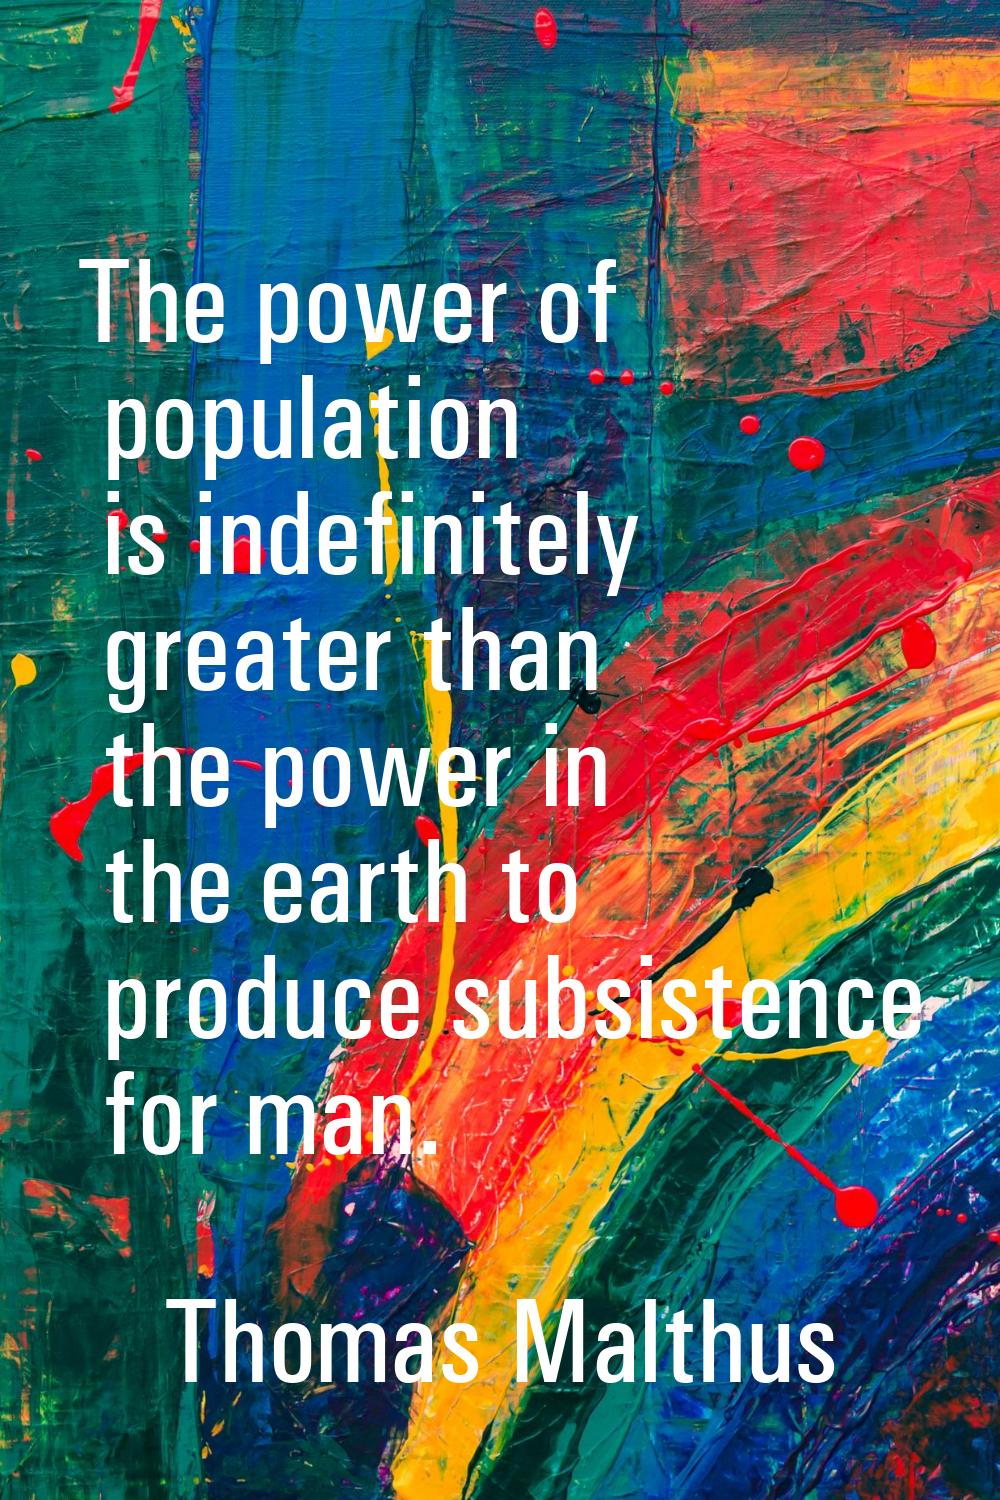 The power of population is indefinitely greater than the power in the earth to produce subsistence 